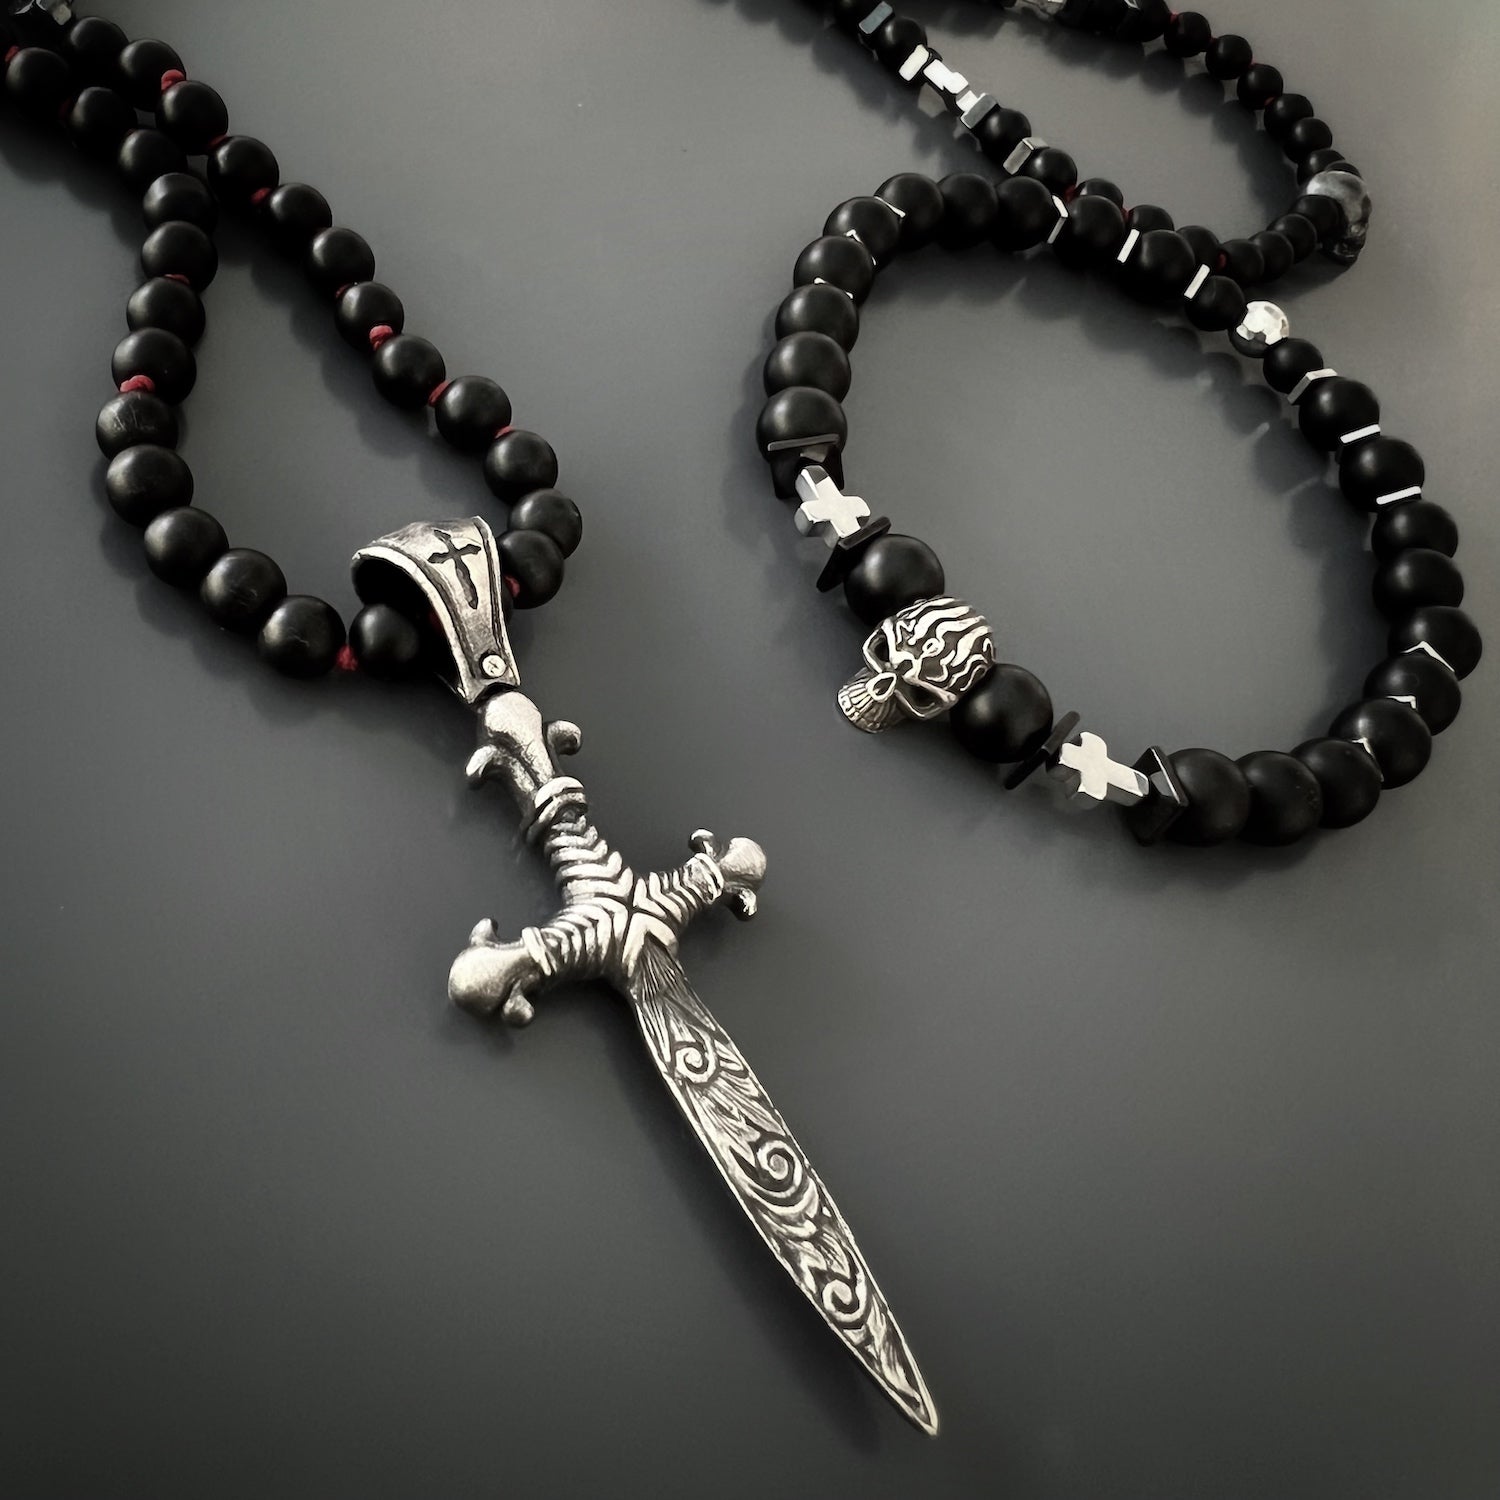 the Courage Onyx Skull Bracelet, beautifully highlighting its black onyx stones, sterling silver skull bead, and silver hematite cross beads. 